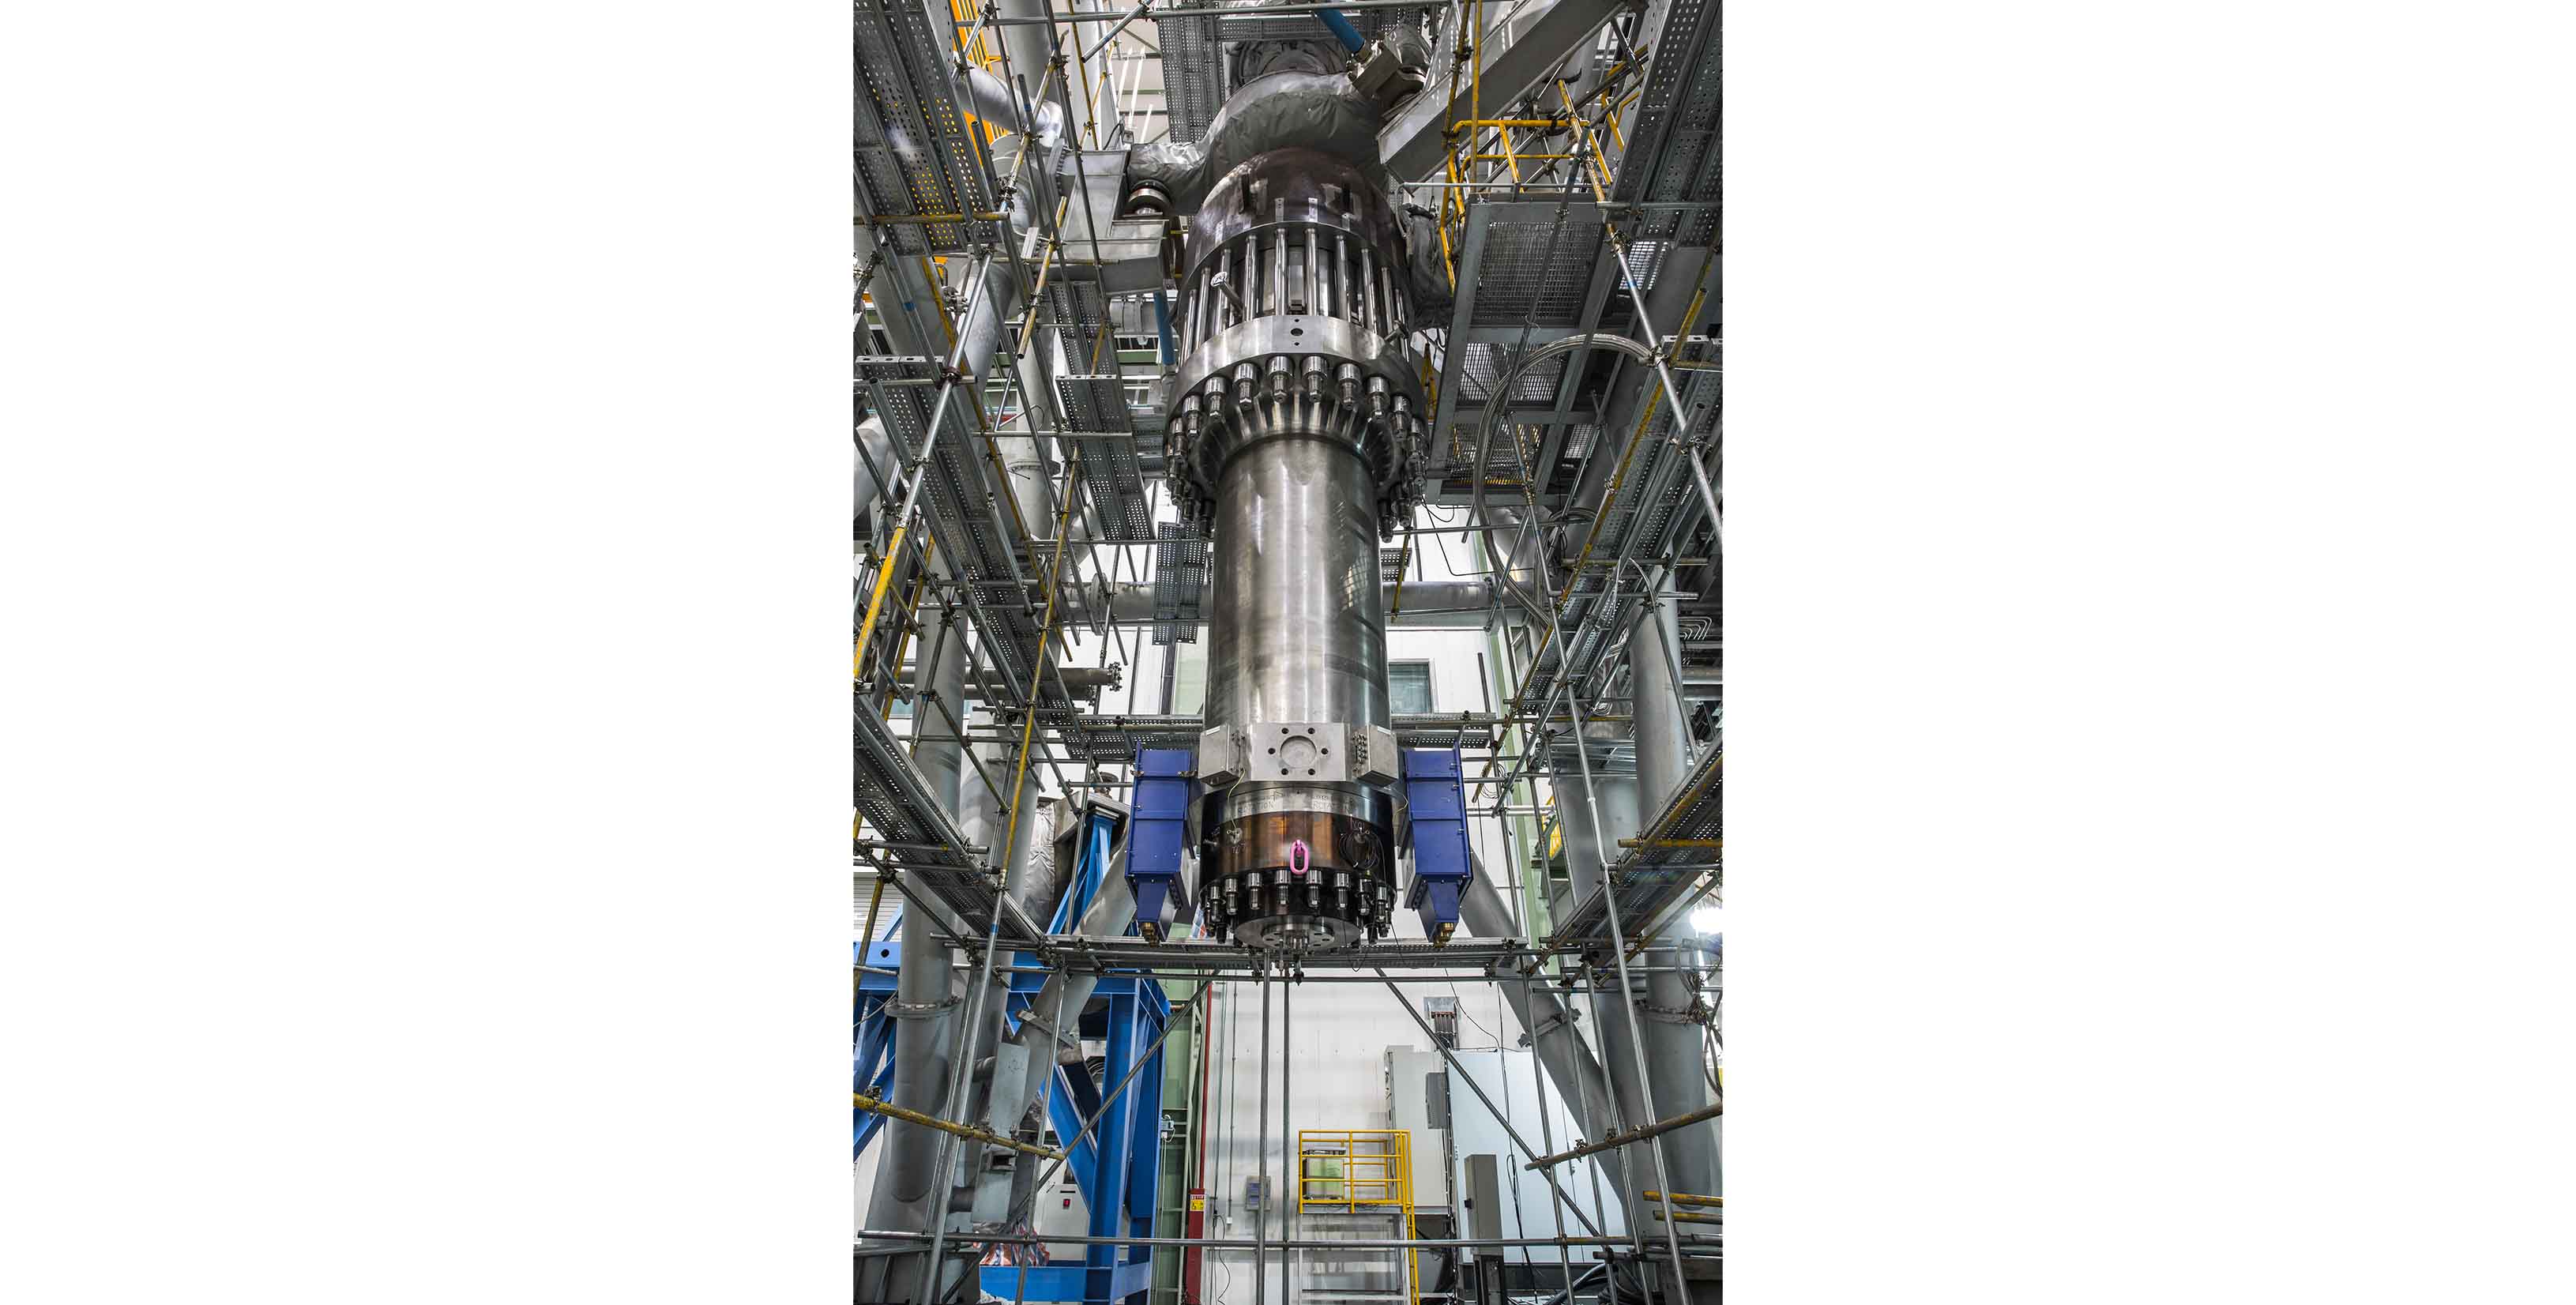 The prototype of the RUV reactor coolant pump has passed a large number of tests conducted at the test facility of the SEC-KSB joint venture in Shanghai. ©KSB SE & Co KGaA, Frankenthal.